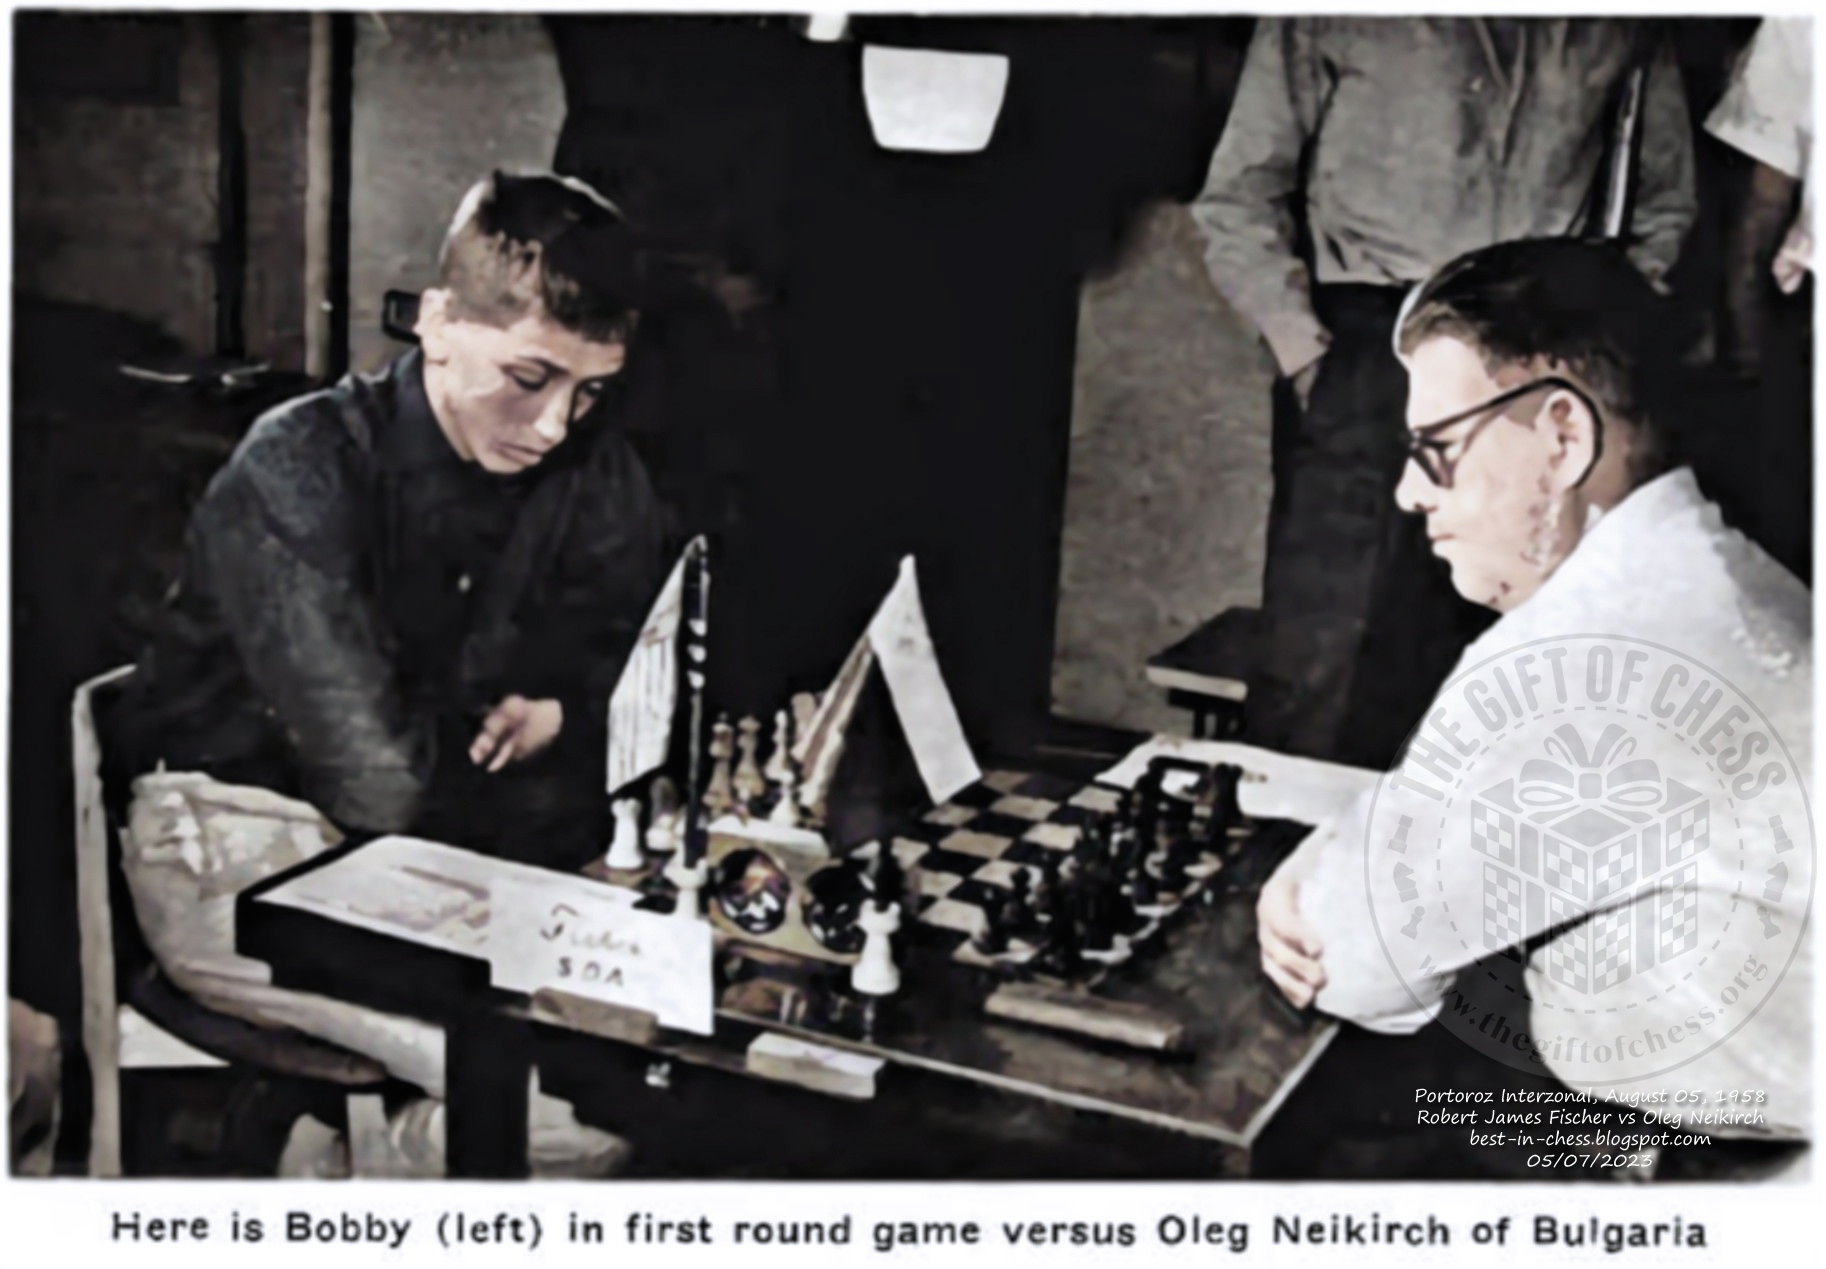 THE MONDAY EVENING CLUB: Dynasty: The brilliance of Bobby Fischer